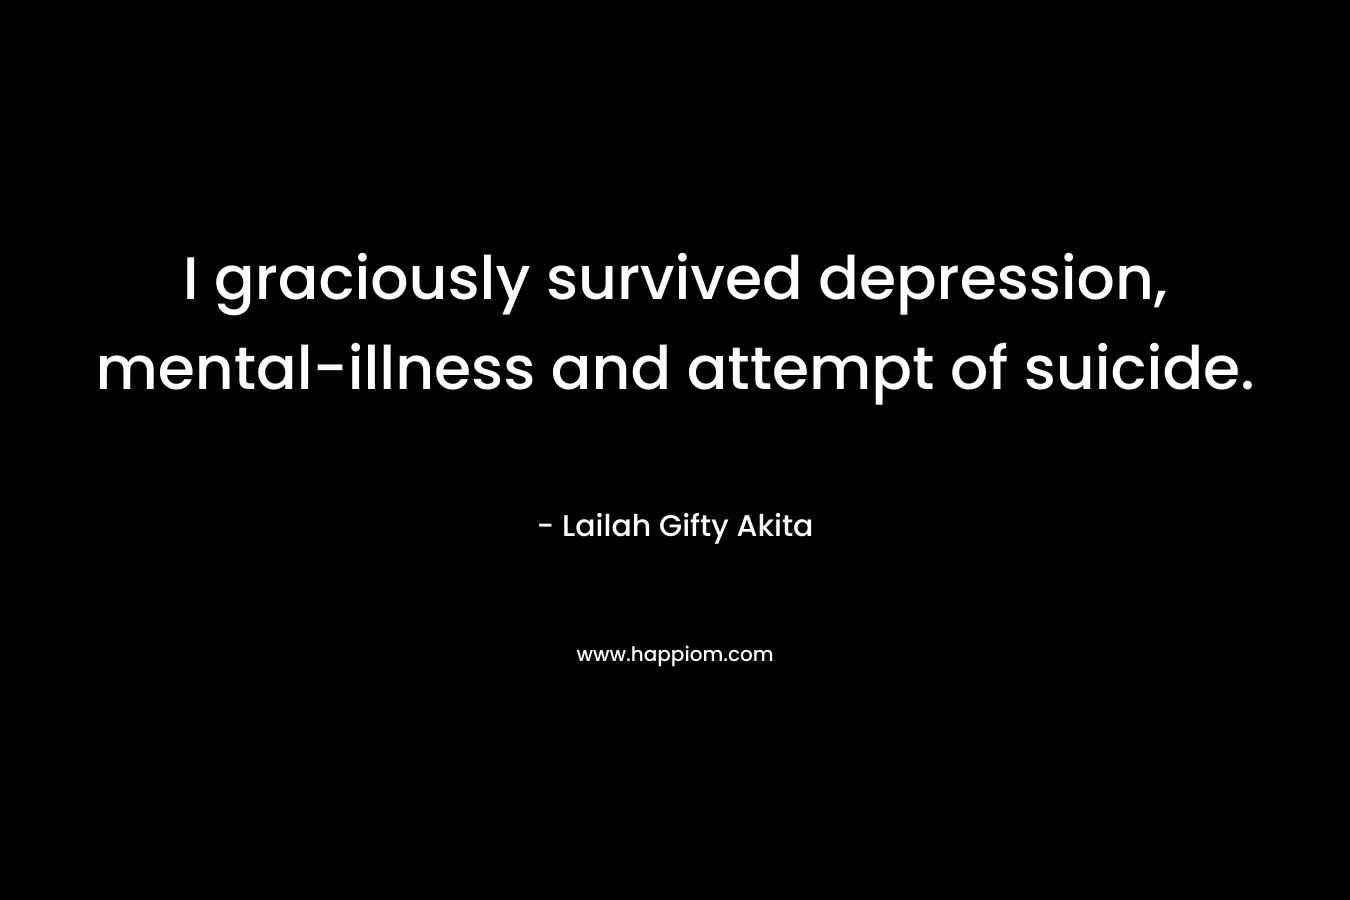 I graciously survived depression, mental-illness and attempt of suicide. – Lailah Gifty Akita